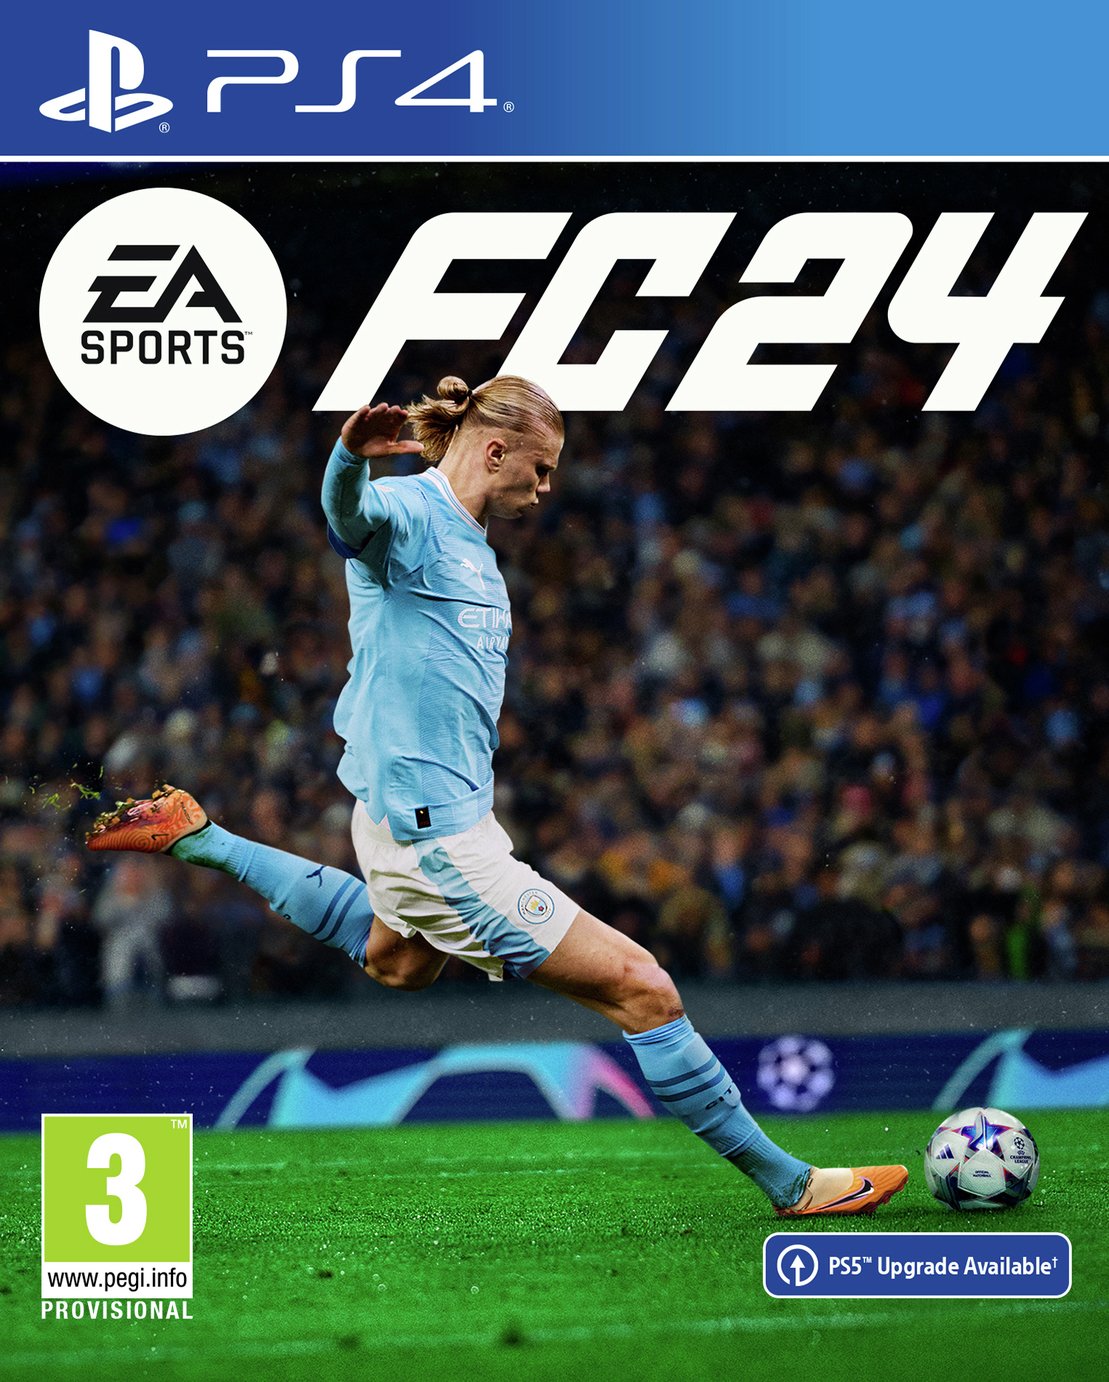 EA SPORTS FC 24 Mobile Beta Version Download For Android & iOS